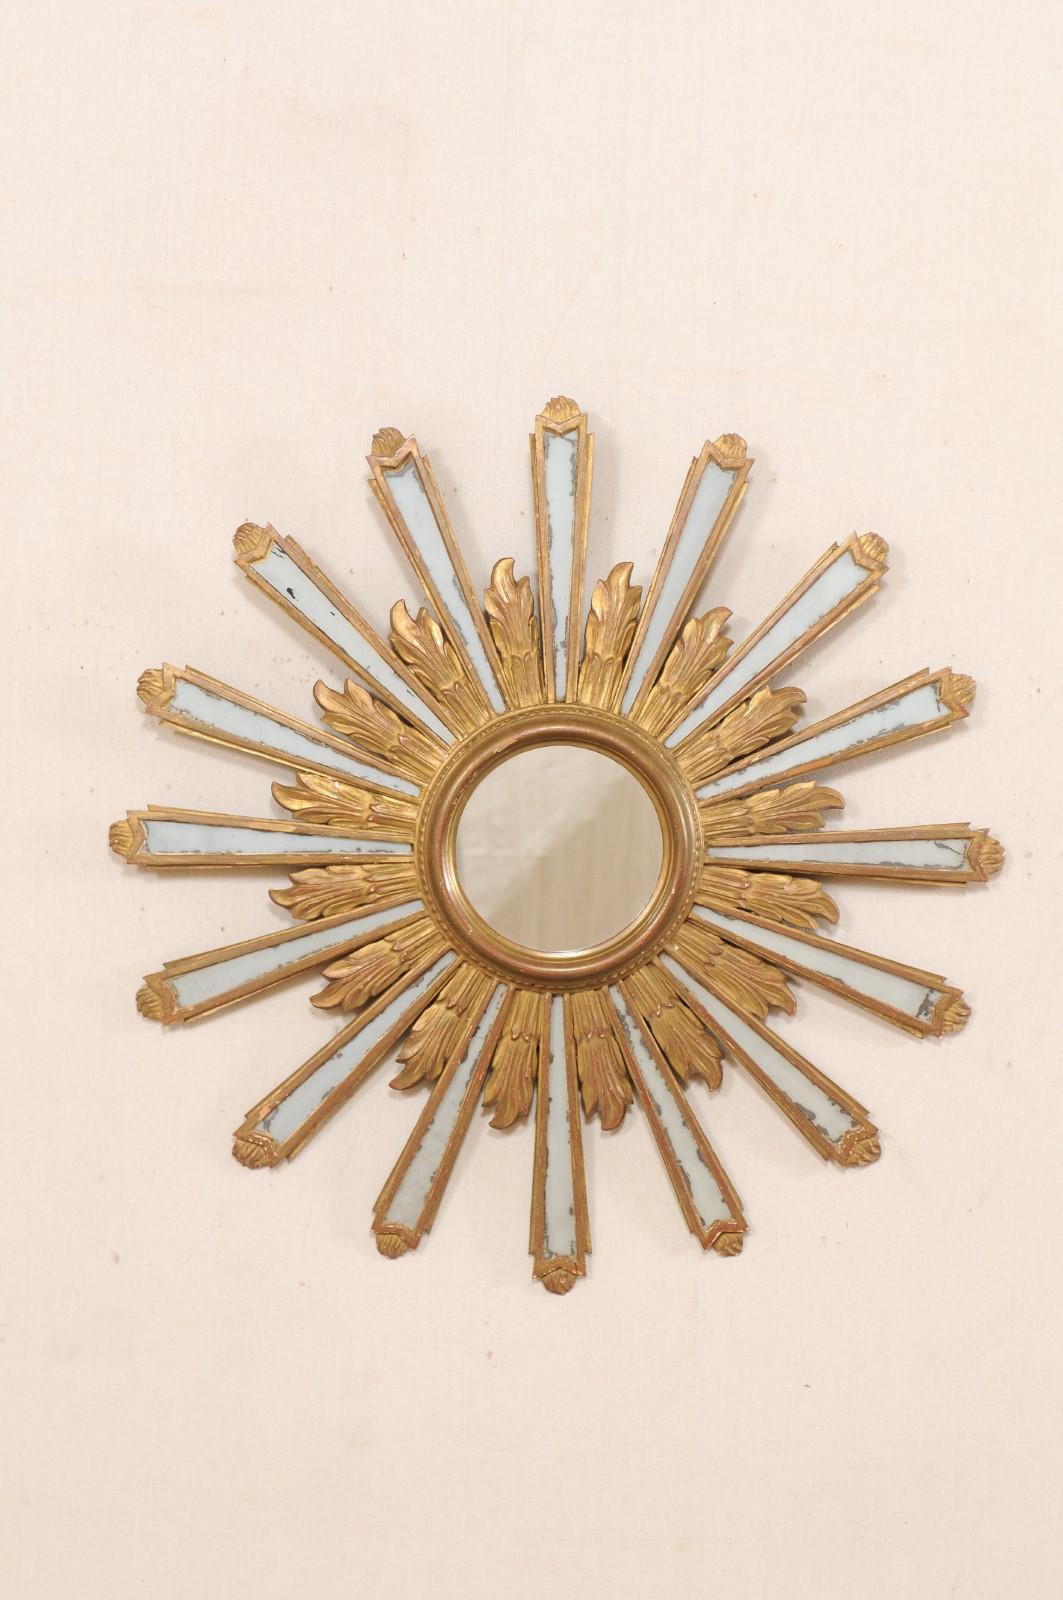 A Spanish sunburst mirror from the early 20th century. This antique mirror from Spain, just shy of 3 feet in diameter, features a circular-shaped frame with central mirror, and gilded sun-rays emerging like a halo radiating out in undulating